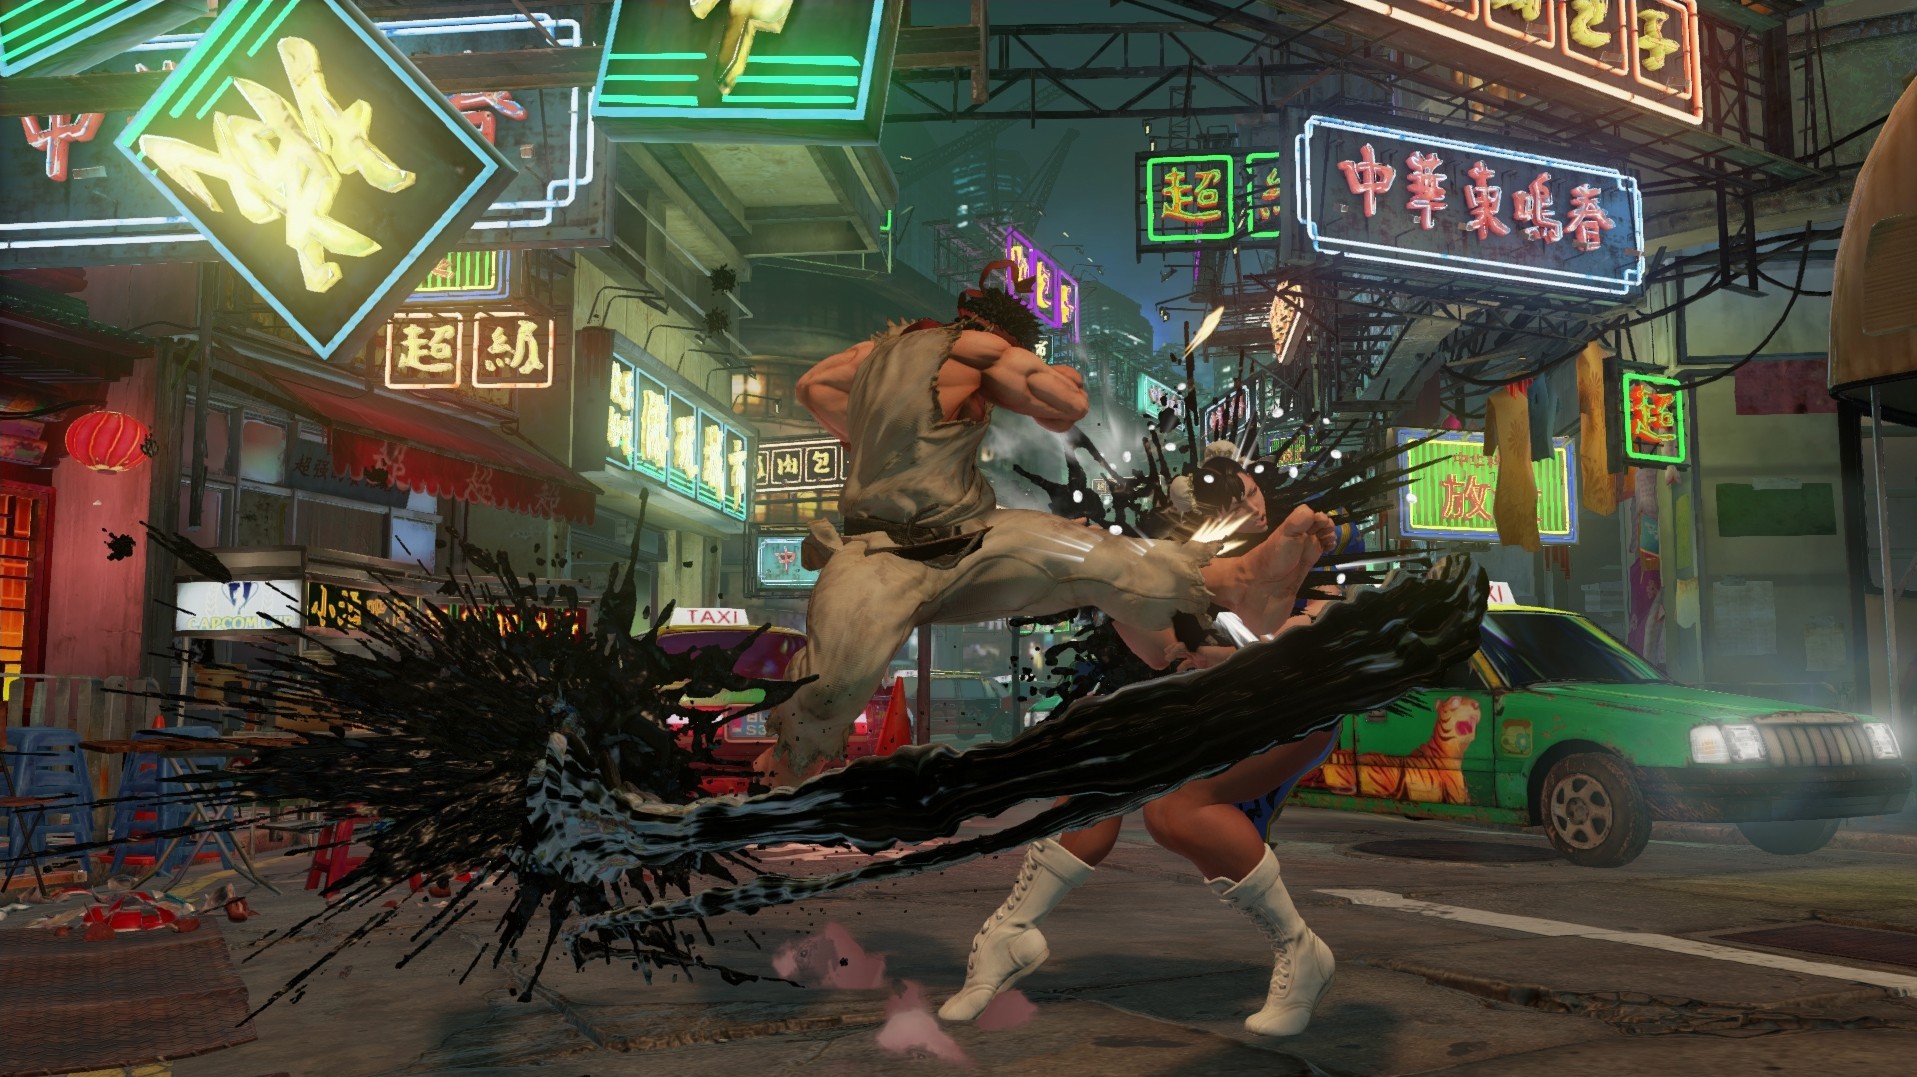 http://i1-news.softpedia-static.com/images/news2/Street-Fighter-V-for-PS4-and-PC-Gets-Gameplay-Video-Screenshots-466766-6.jpg